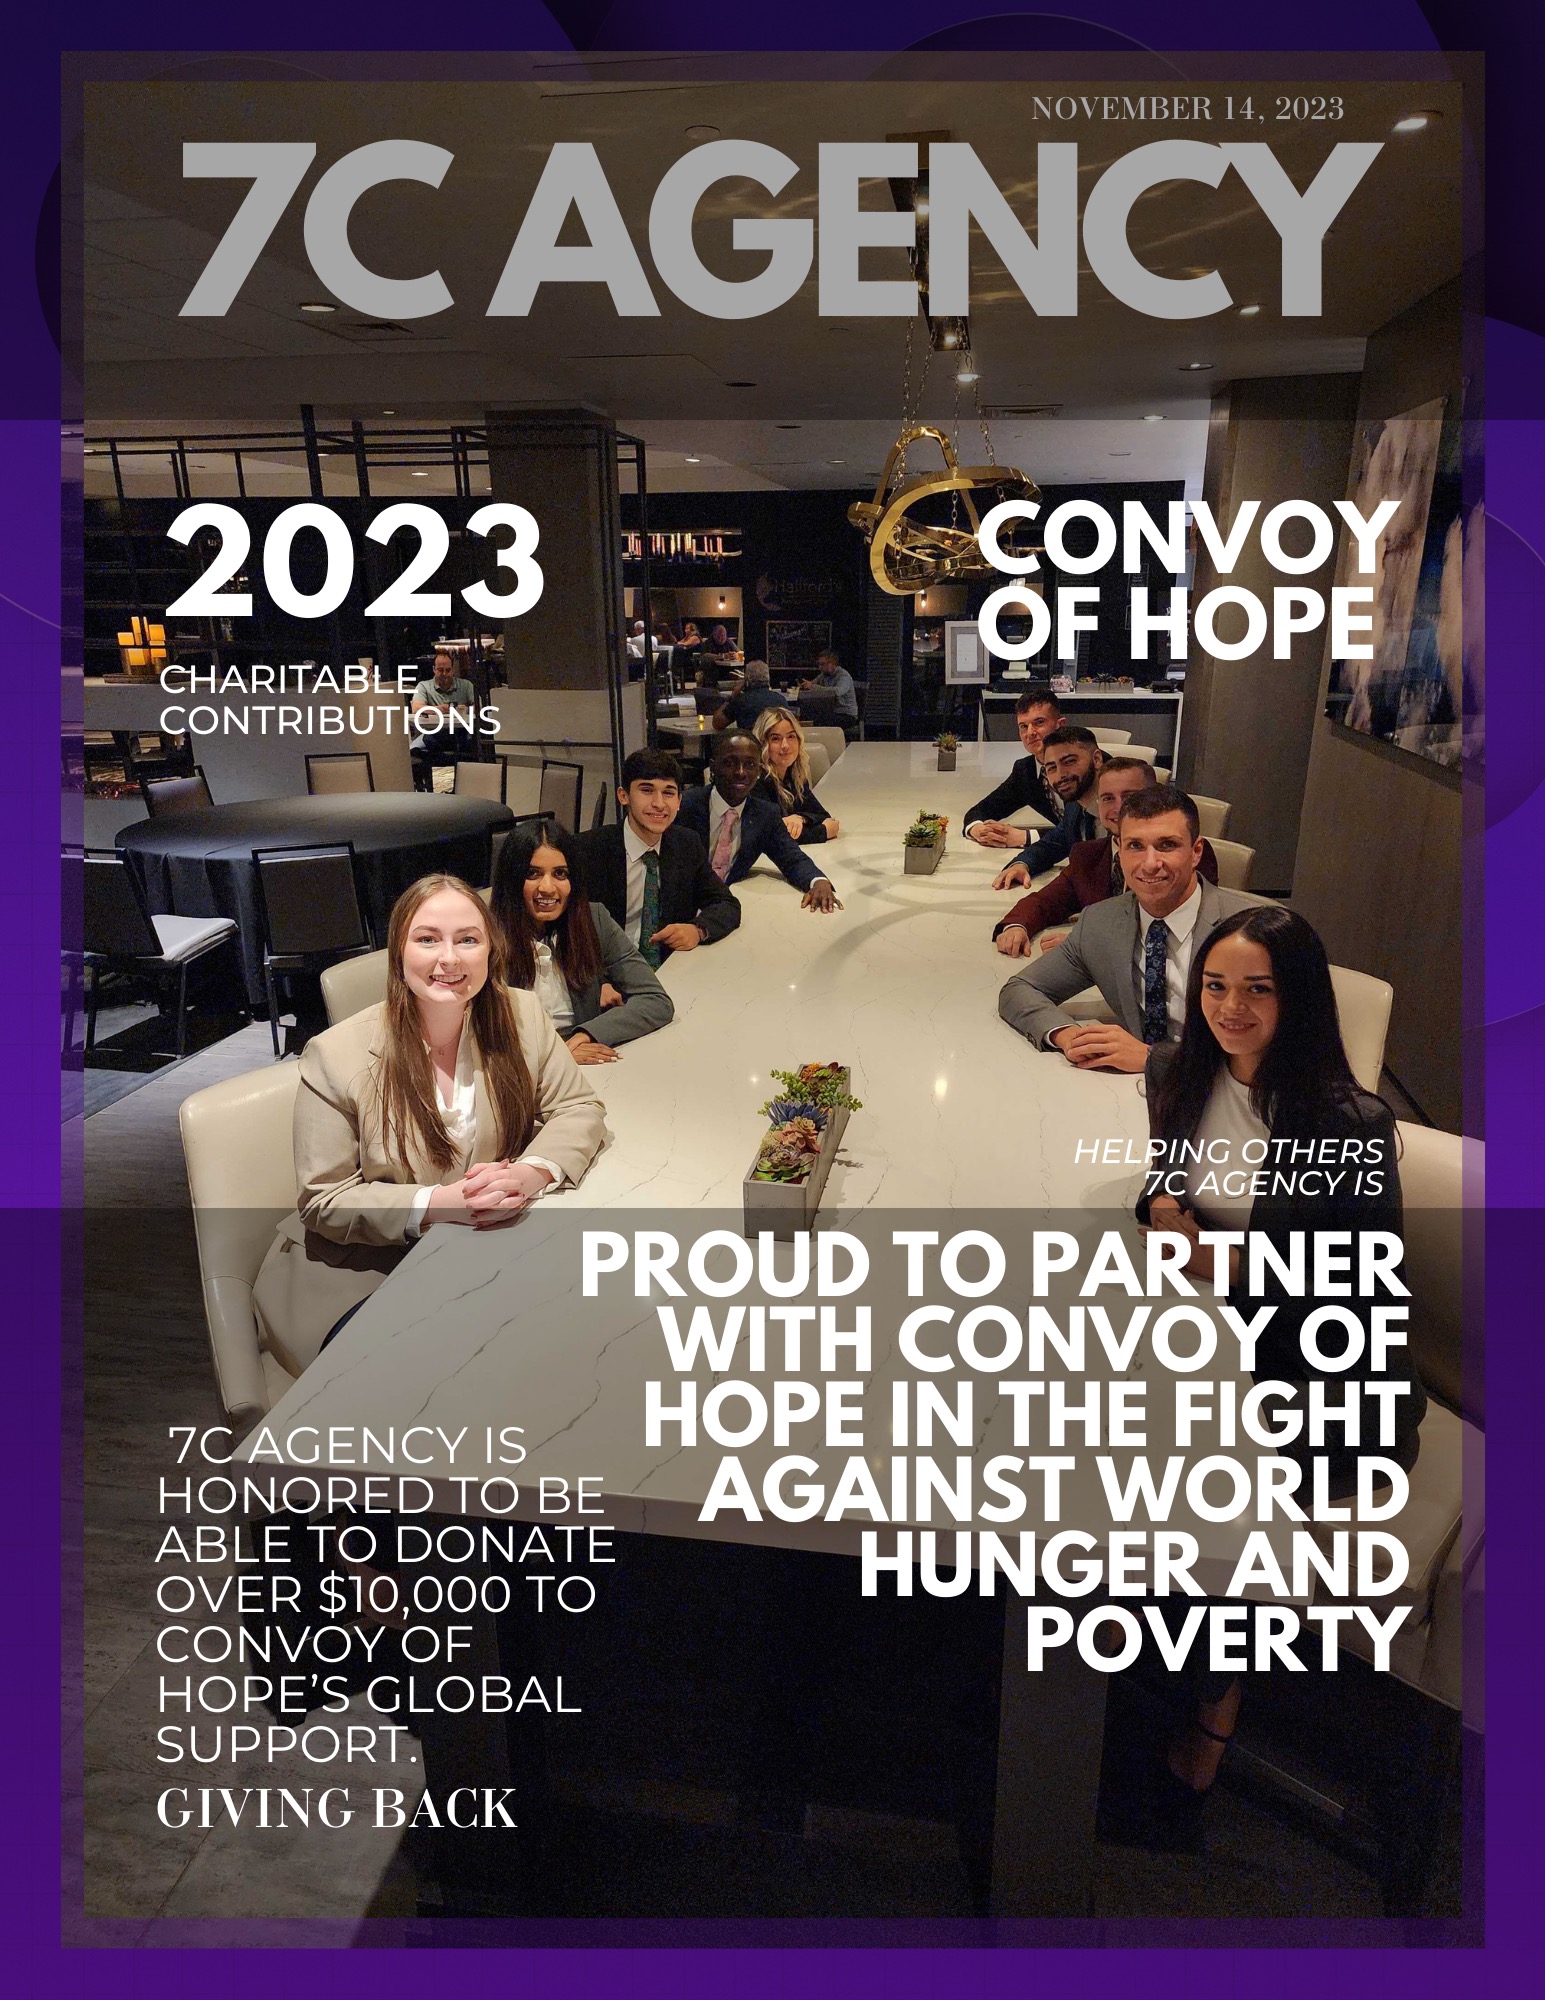 7C Agency Proud to Partner with Convoy of Hope in the Fight Against World Hunger and Poverty